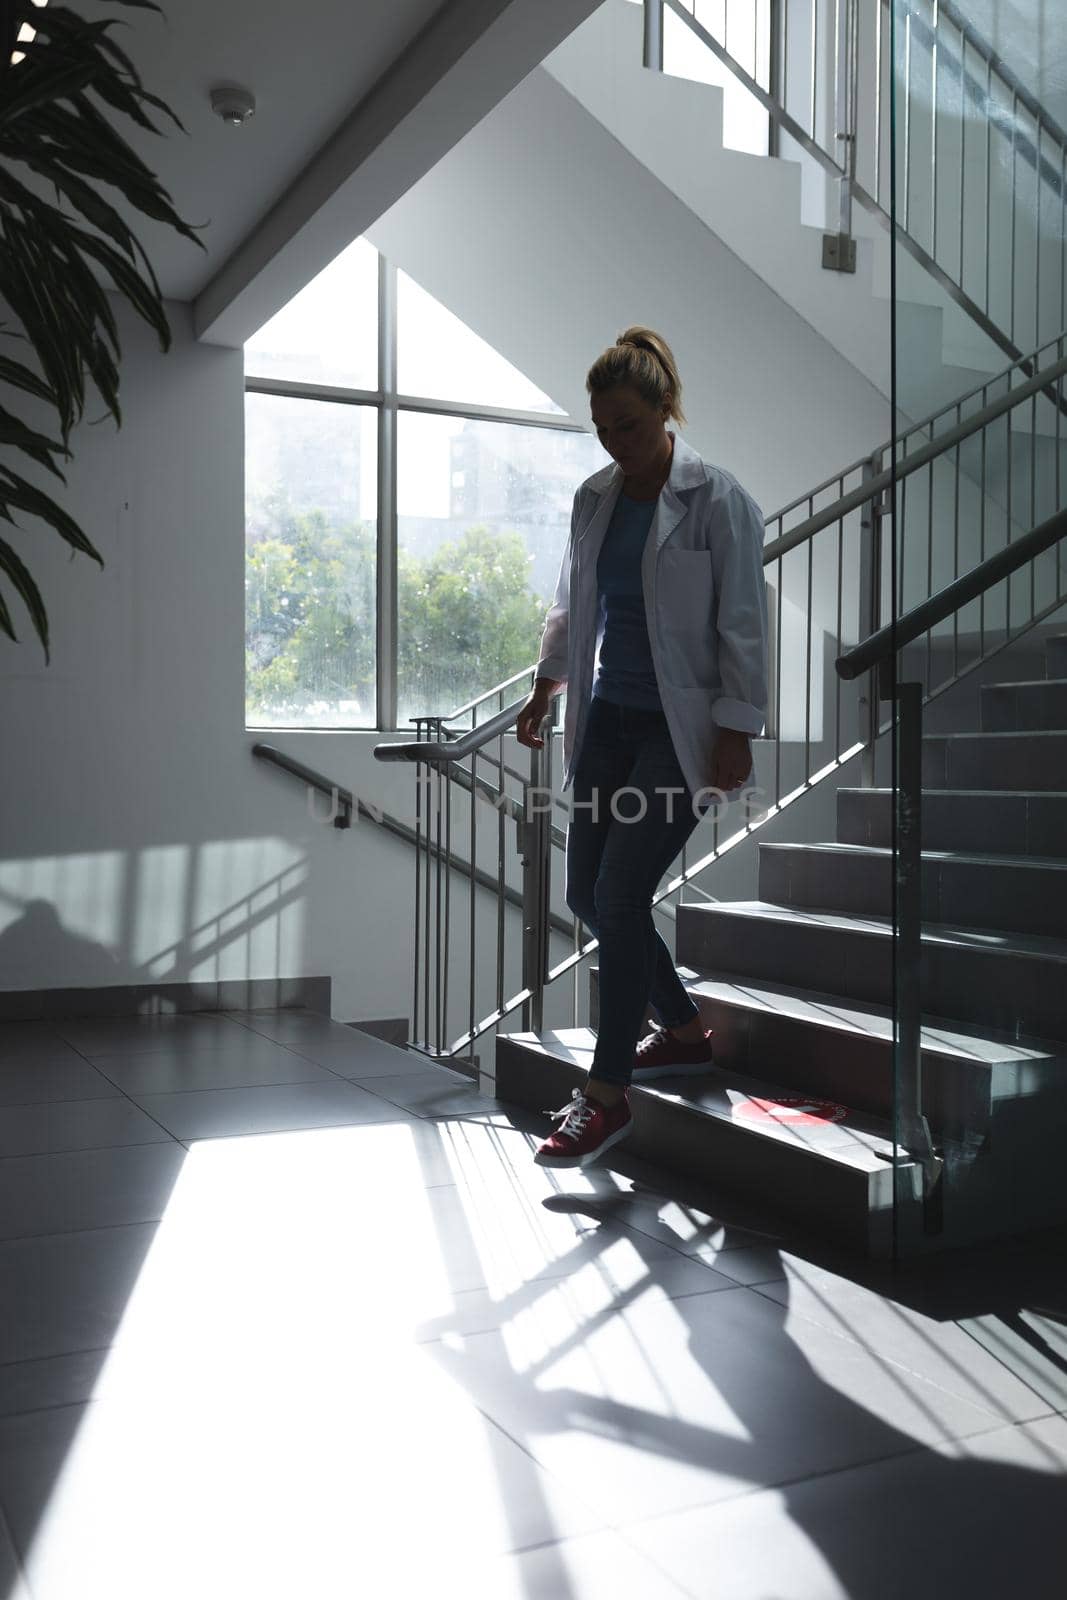 Caucasian female doctor going downstairs on hospital staircase during sunny day. medicine, health and healthcare services.